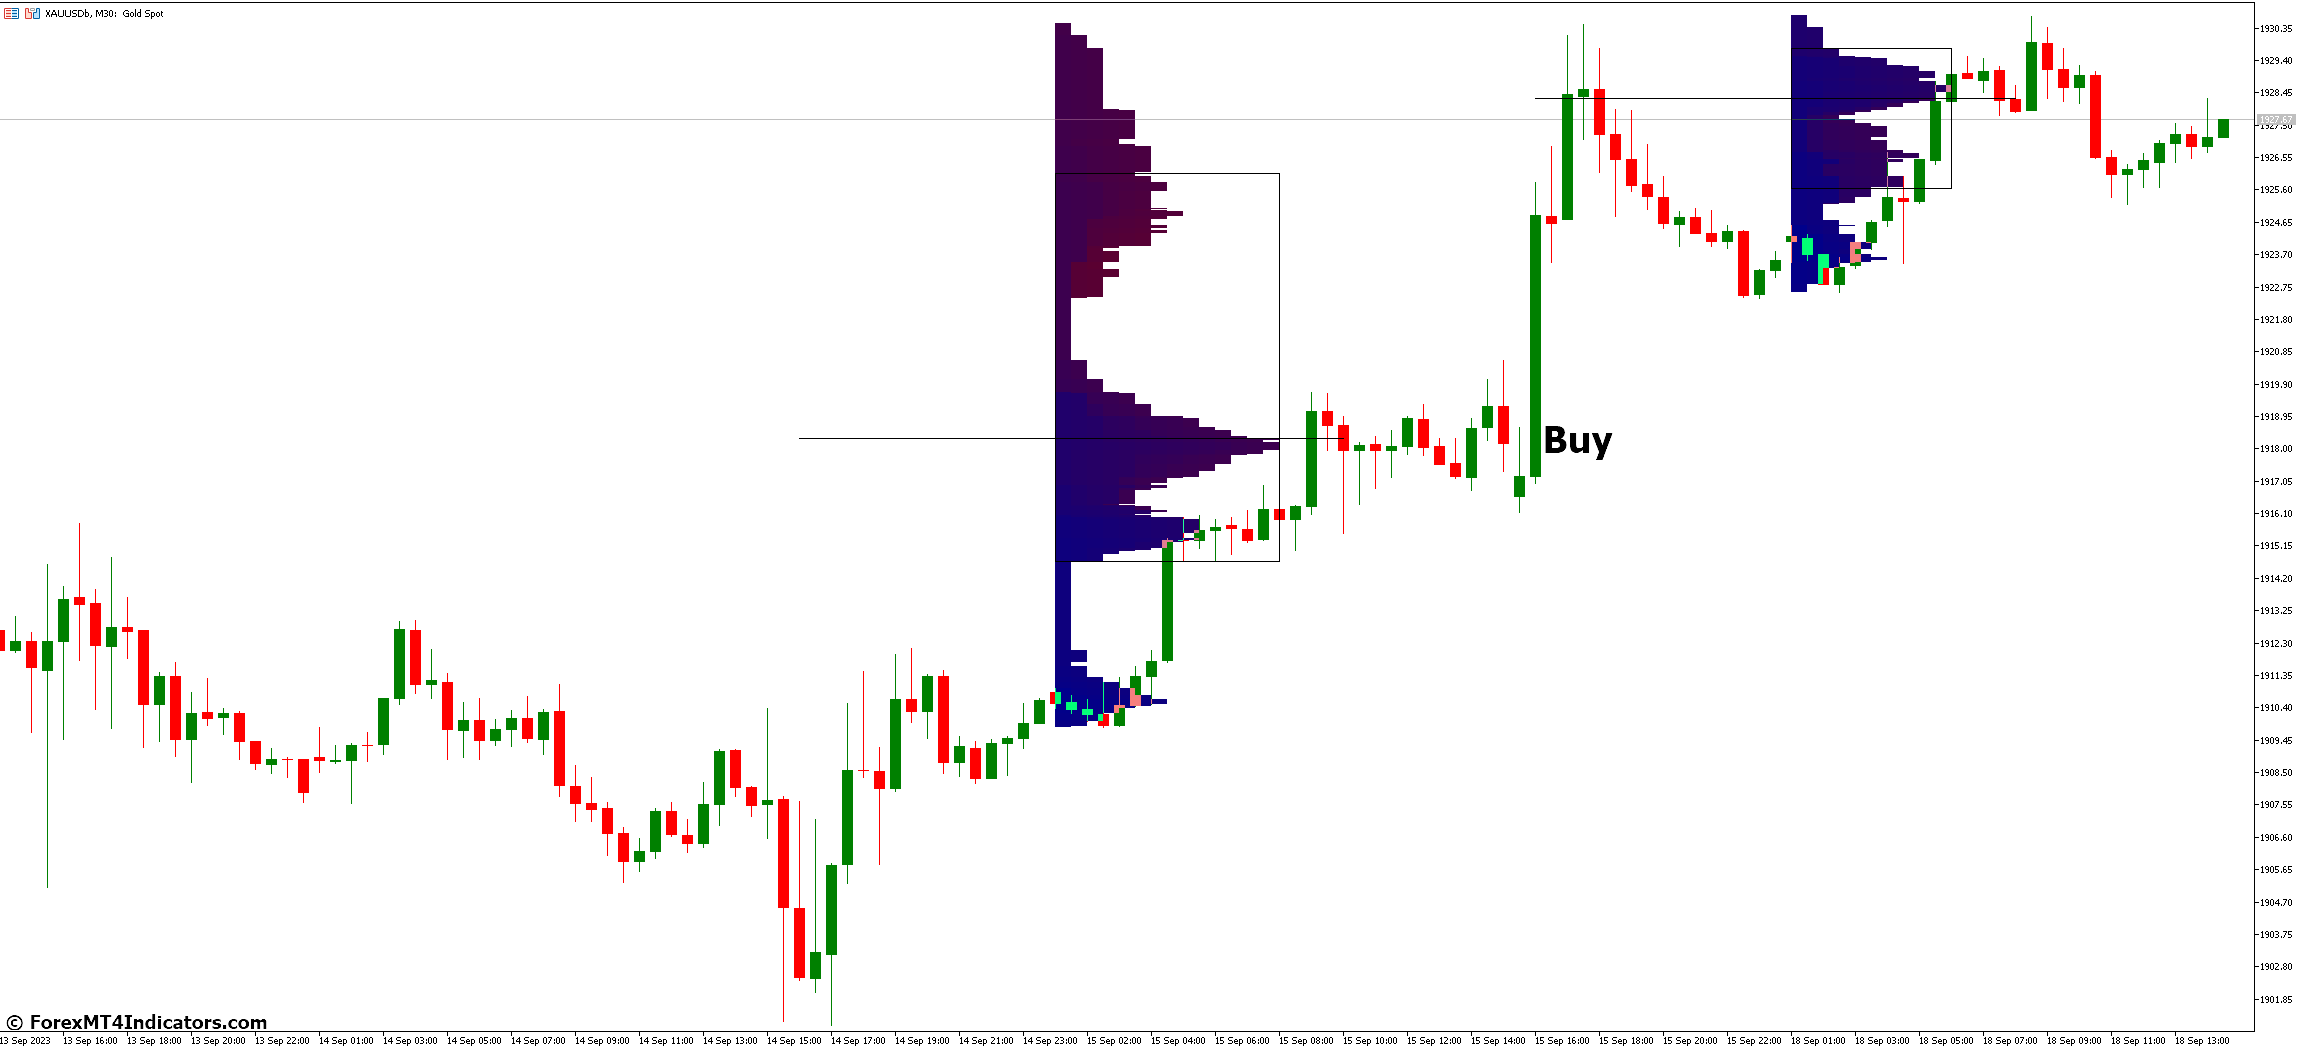 How to Trade with Market Profile MT5 Indicator - Buy Entry